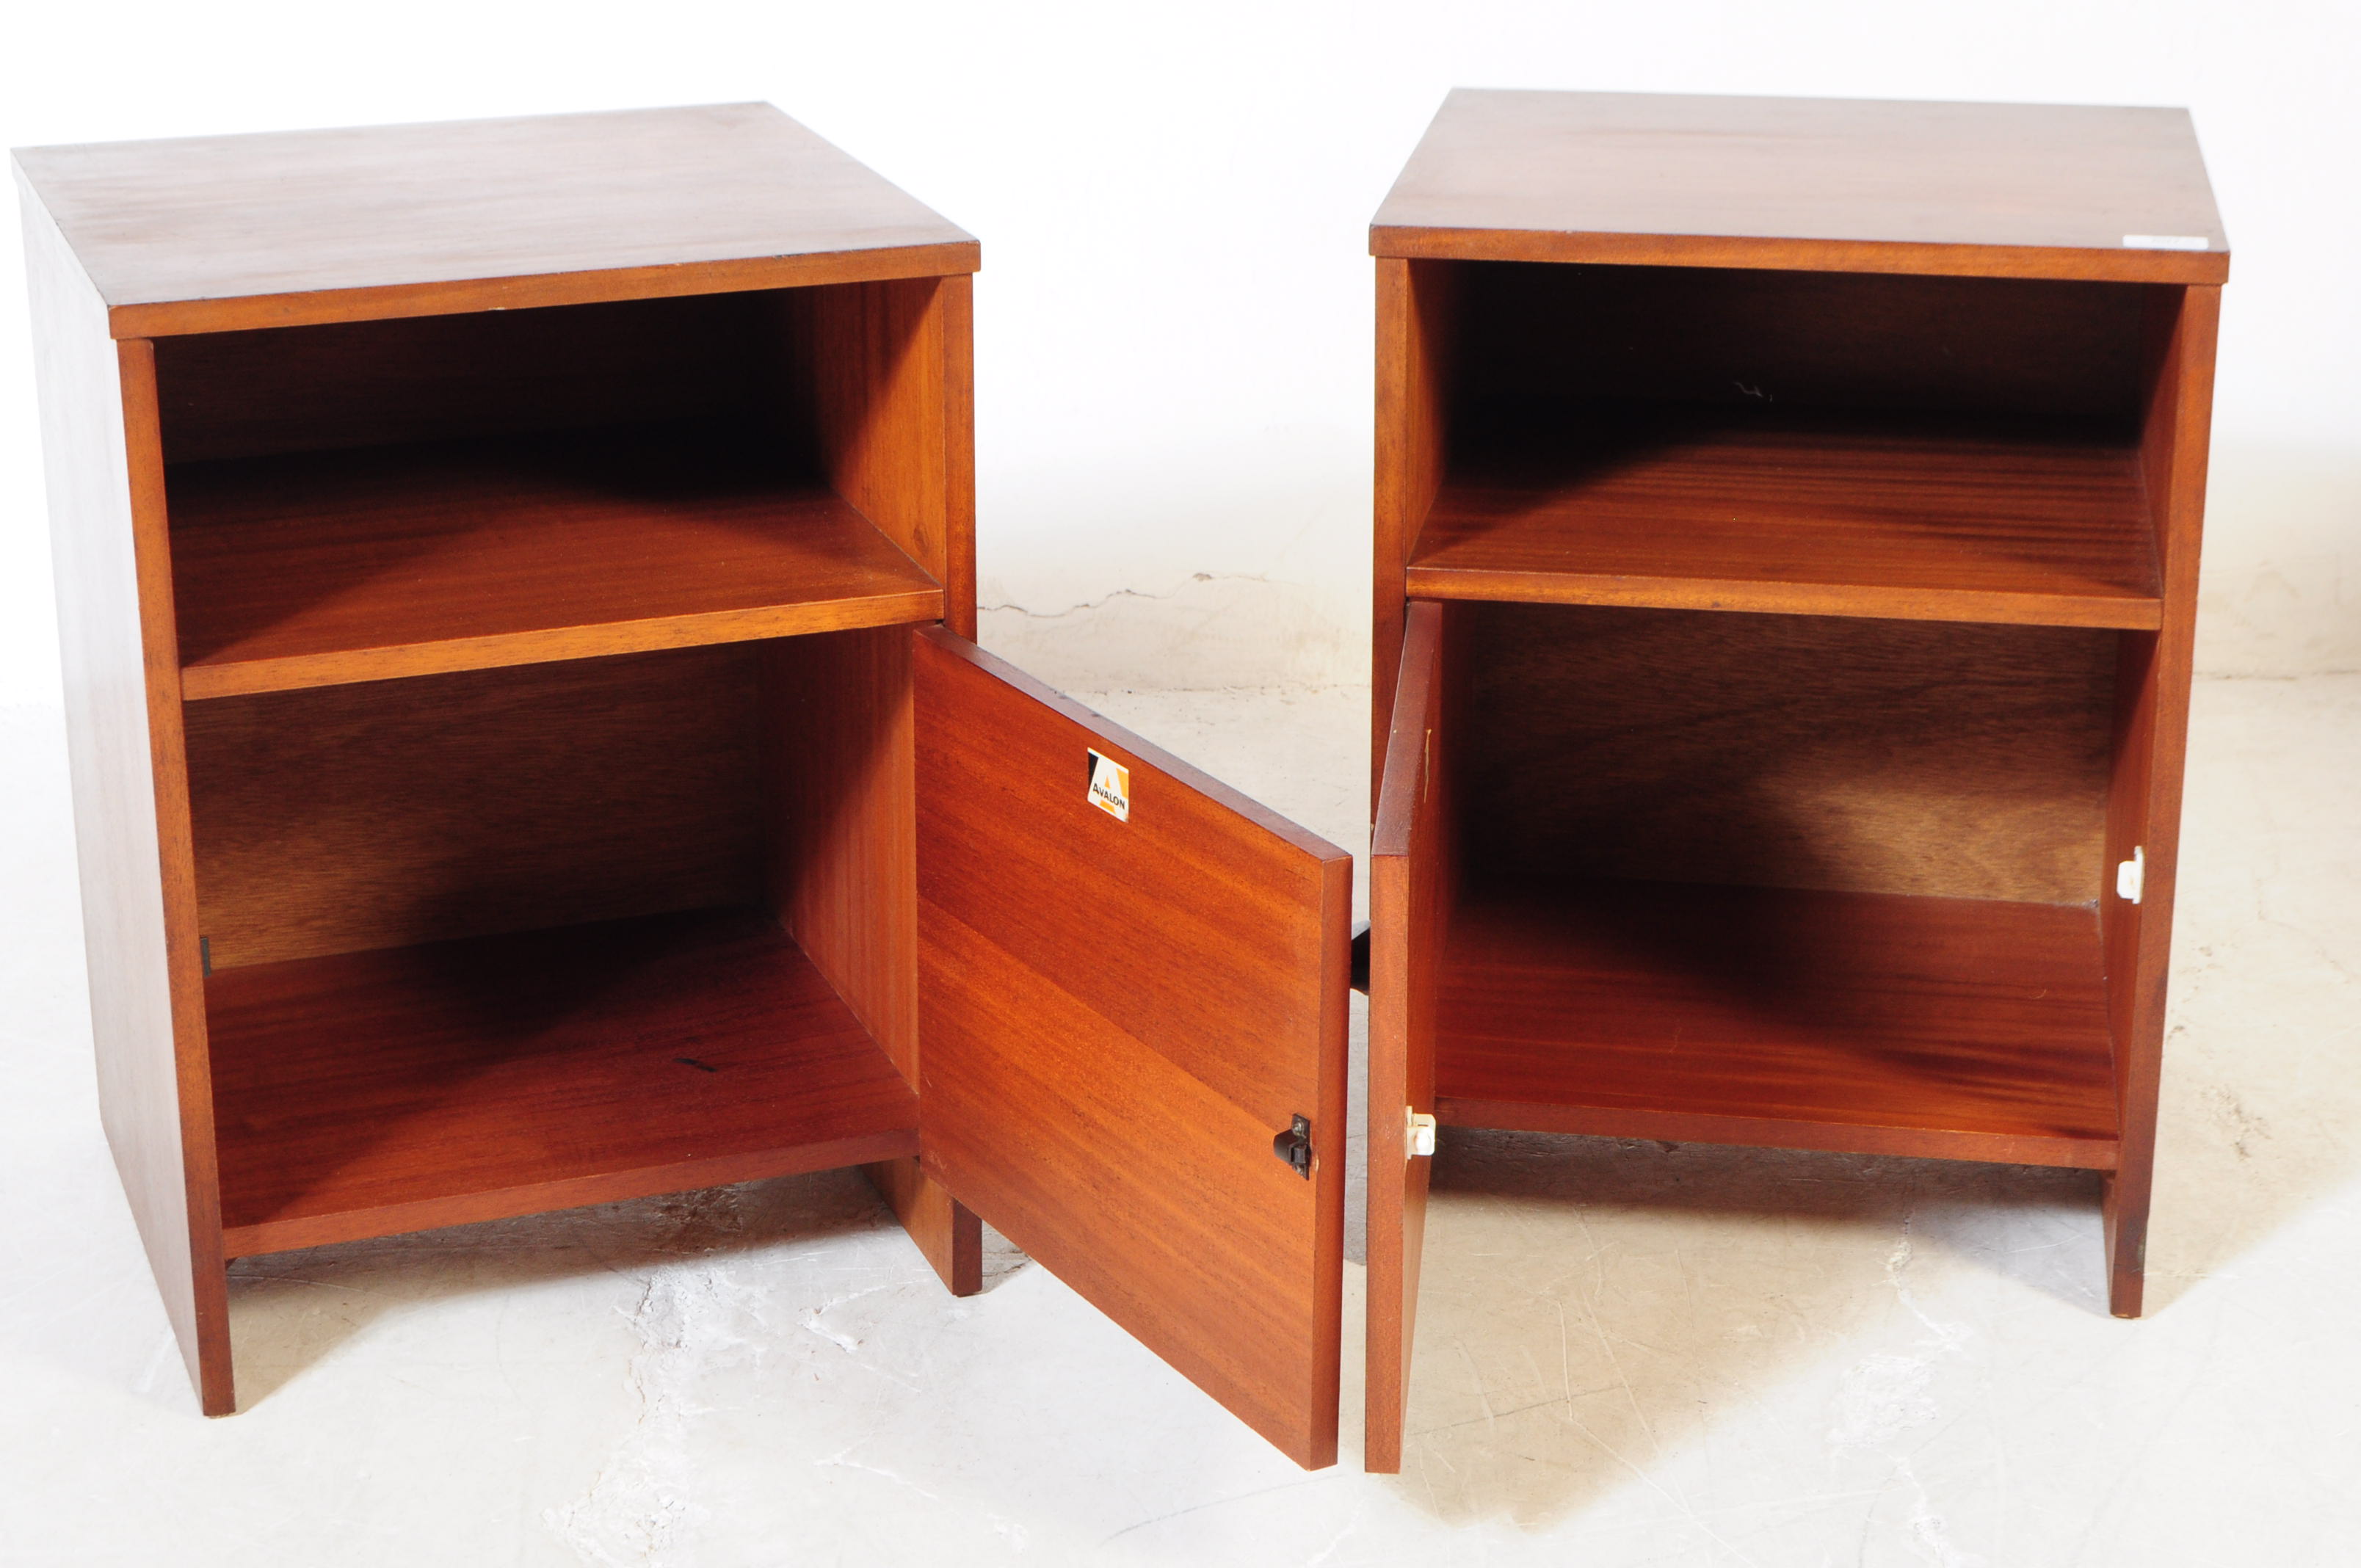 AVALON - PAIR OF MID CENTURY BEDSIDE TABLES - Image 3 of 7